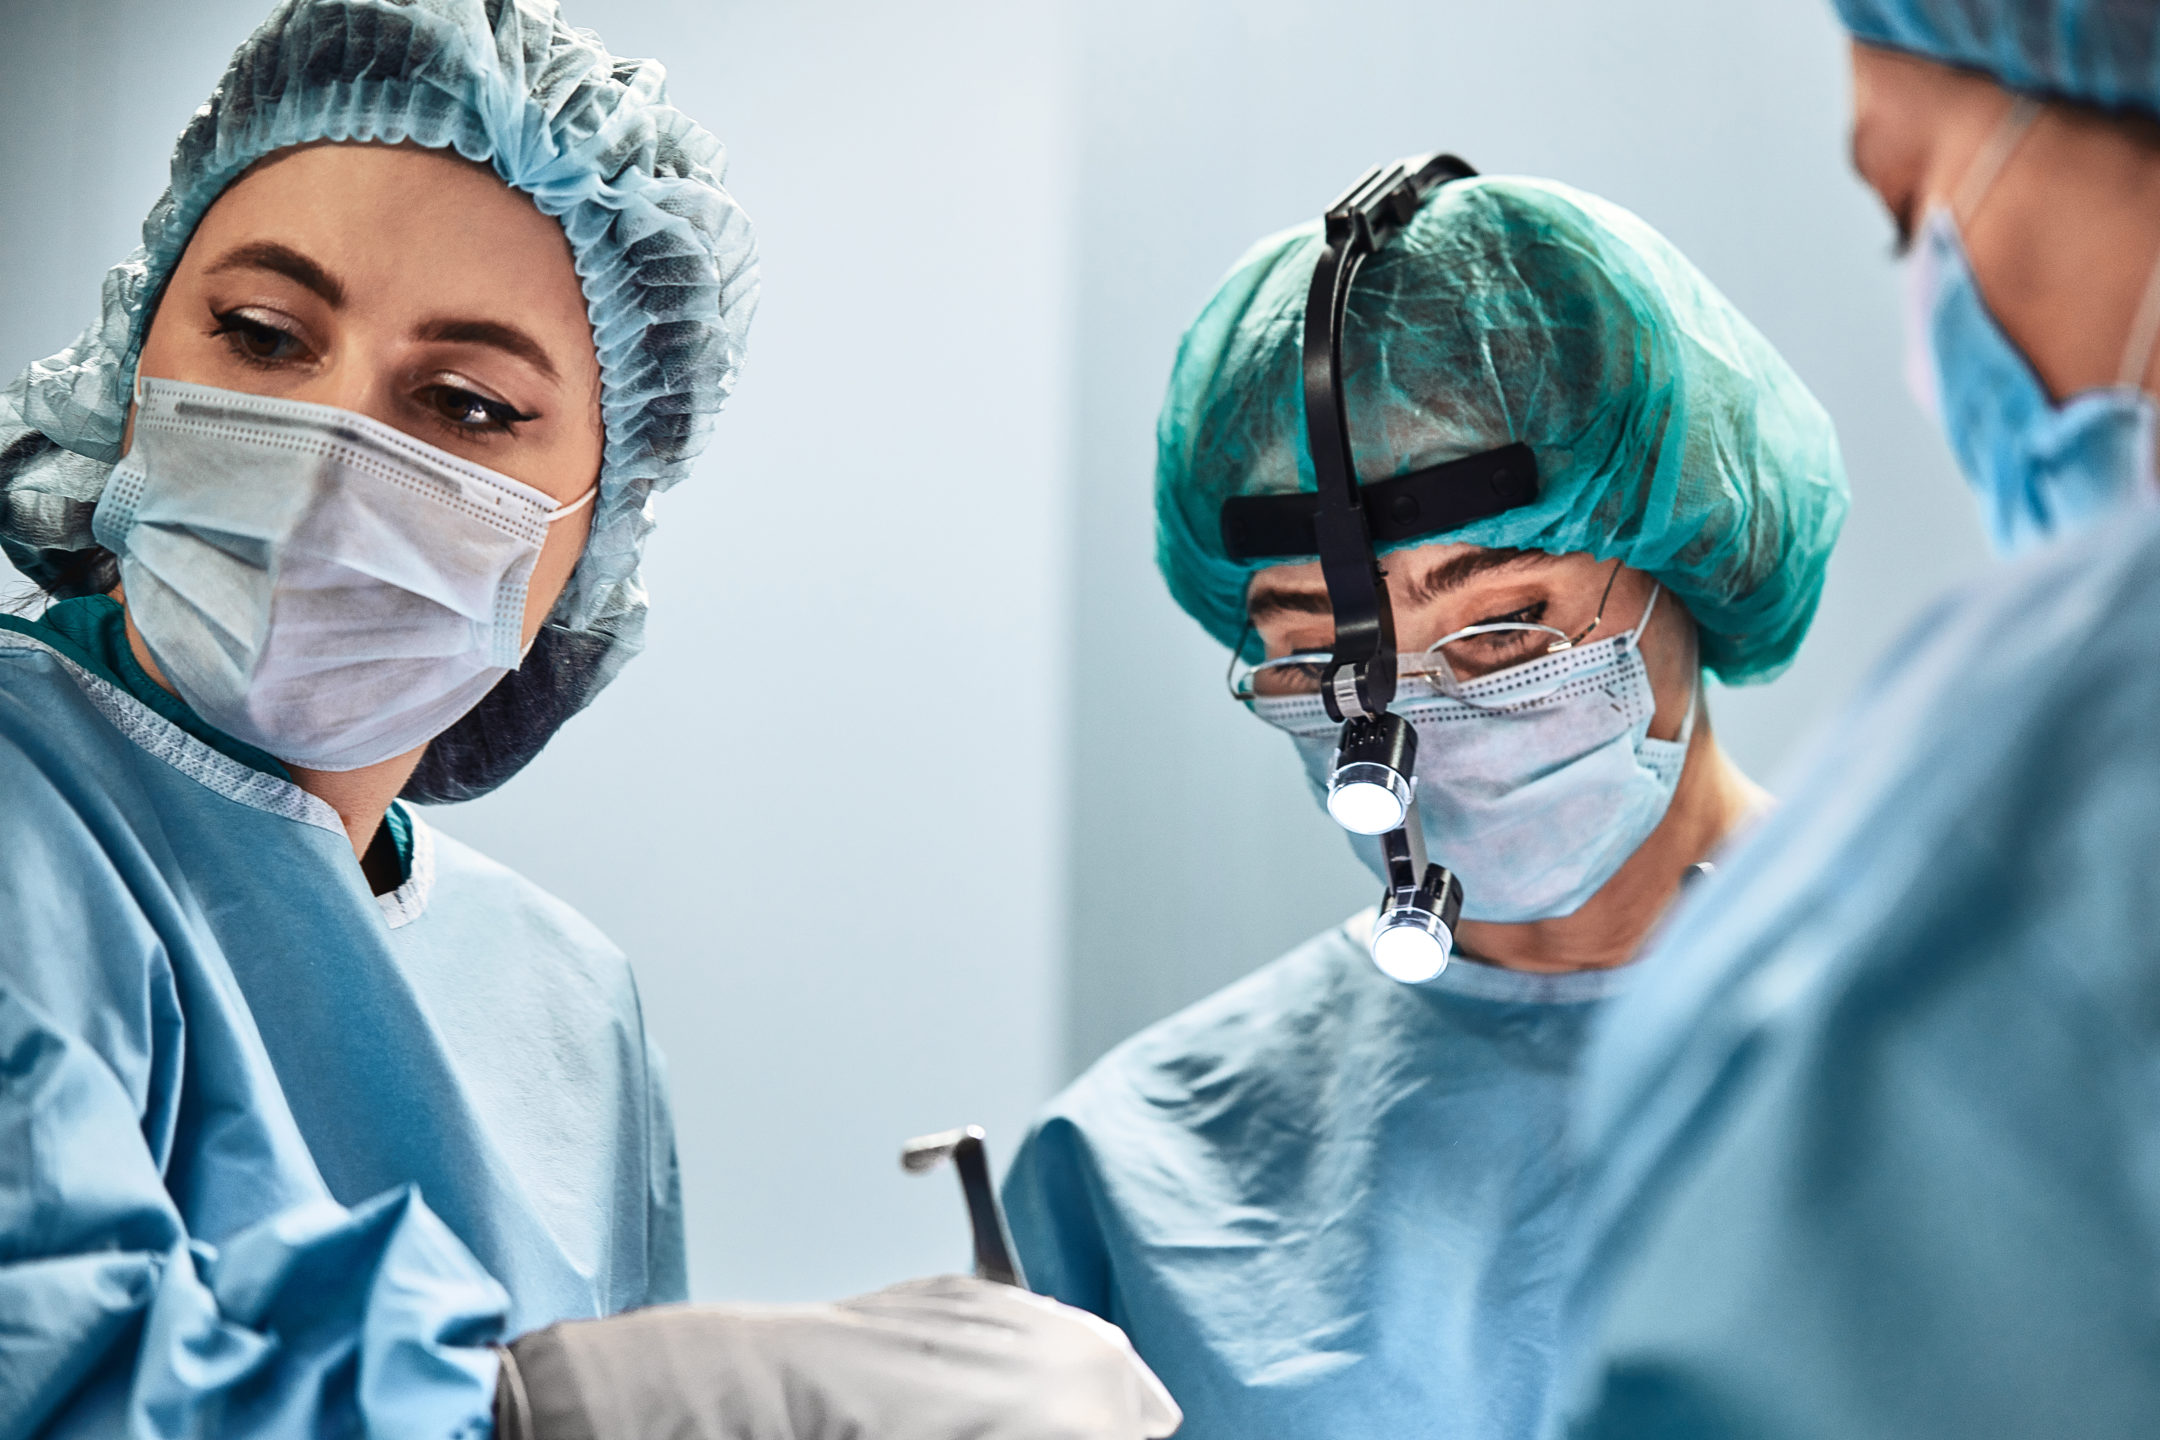 A surgeon and assistants work on a patient. 